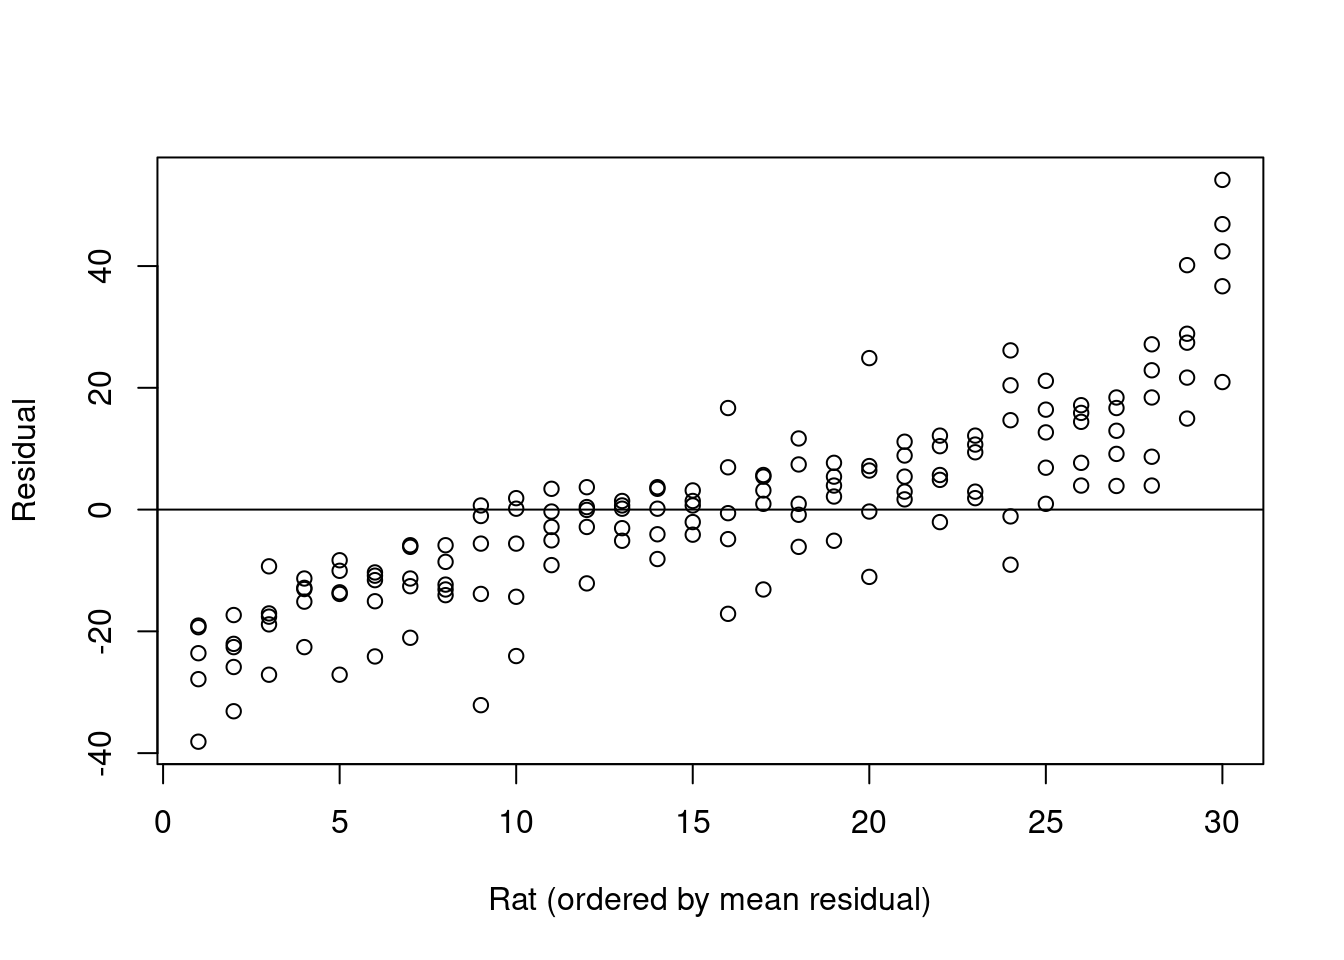 Residuals from a simple linear regression for each rat in the rat.growth data